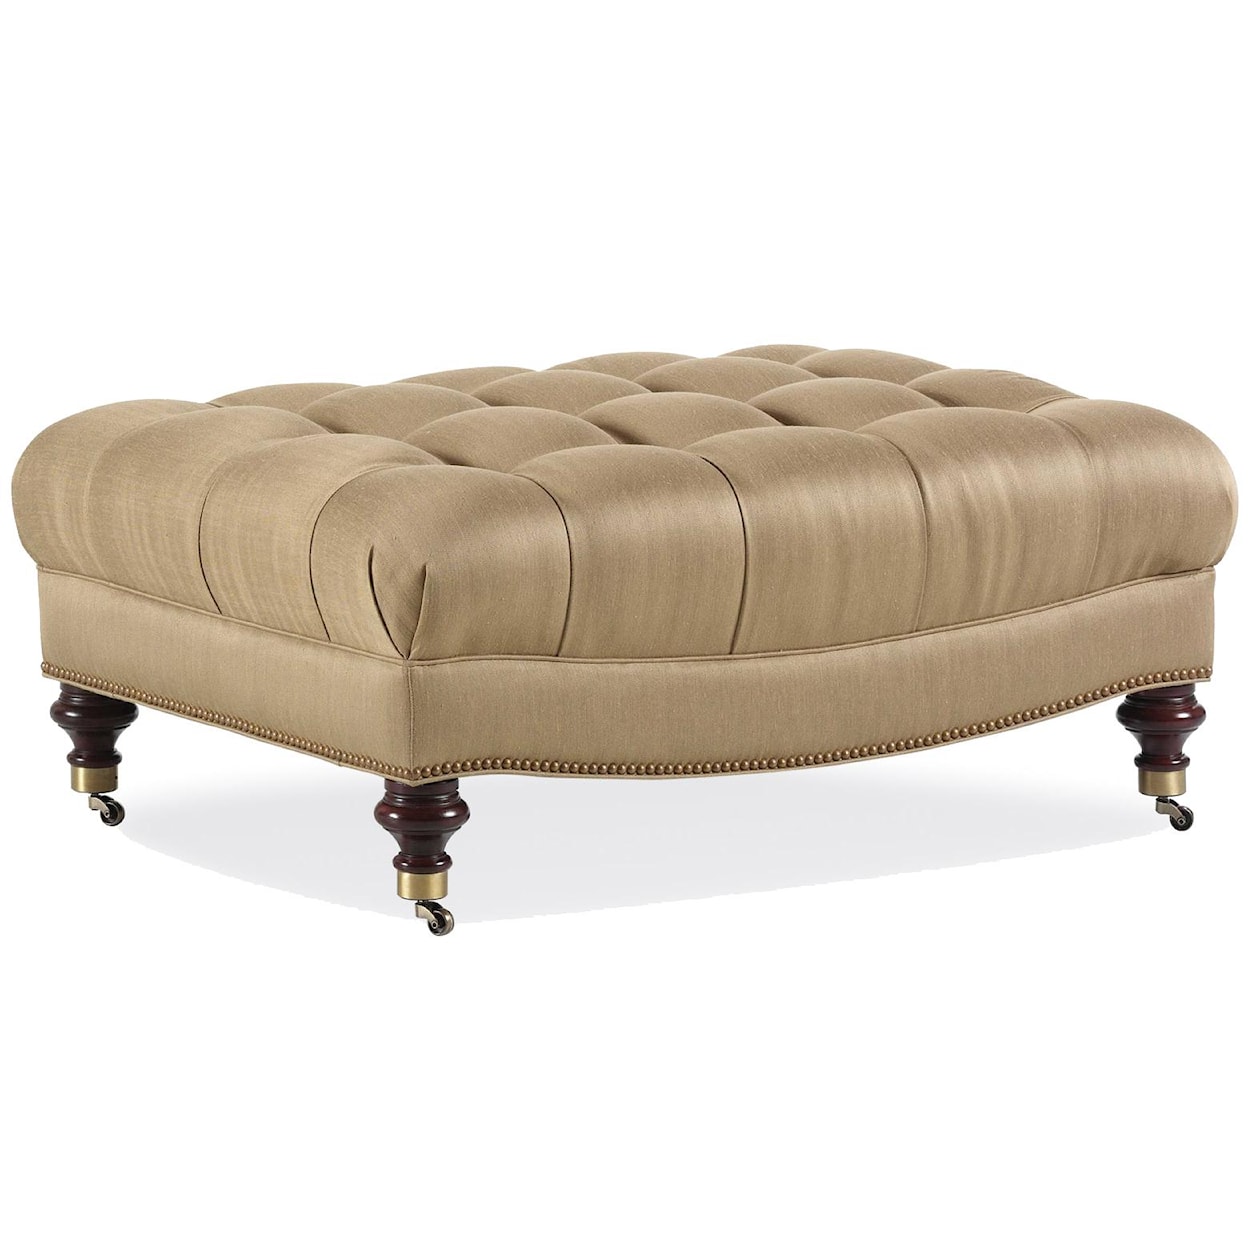 Jessica Charles Fine Upholstered Accents Cocktail Ottoman   